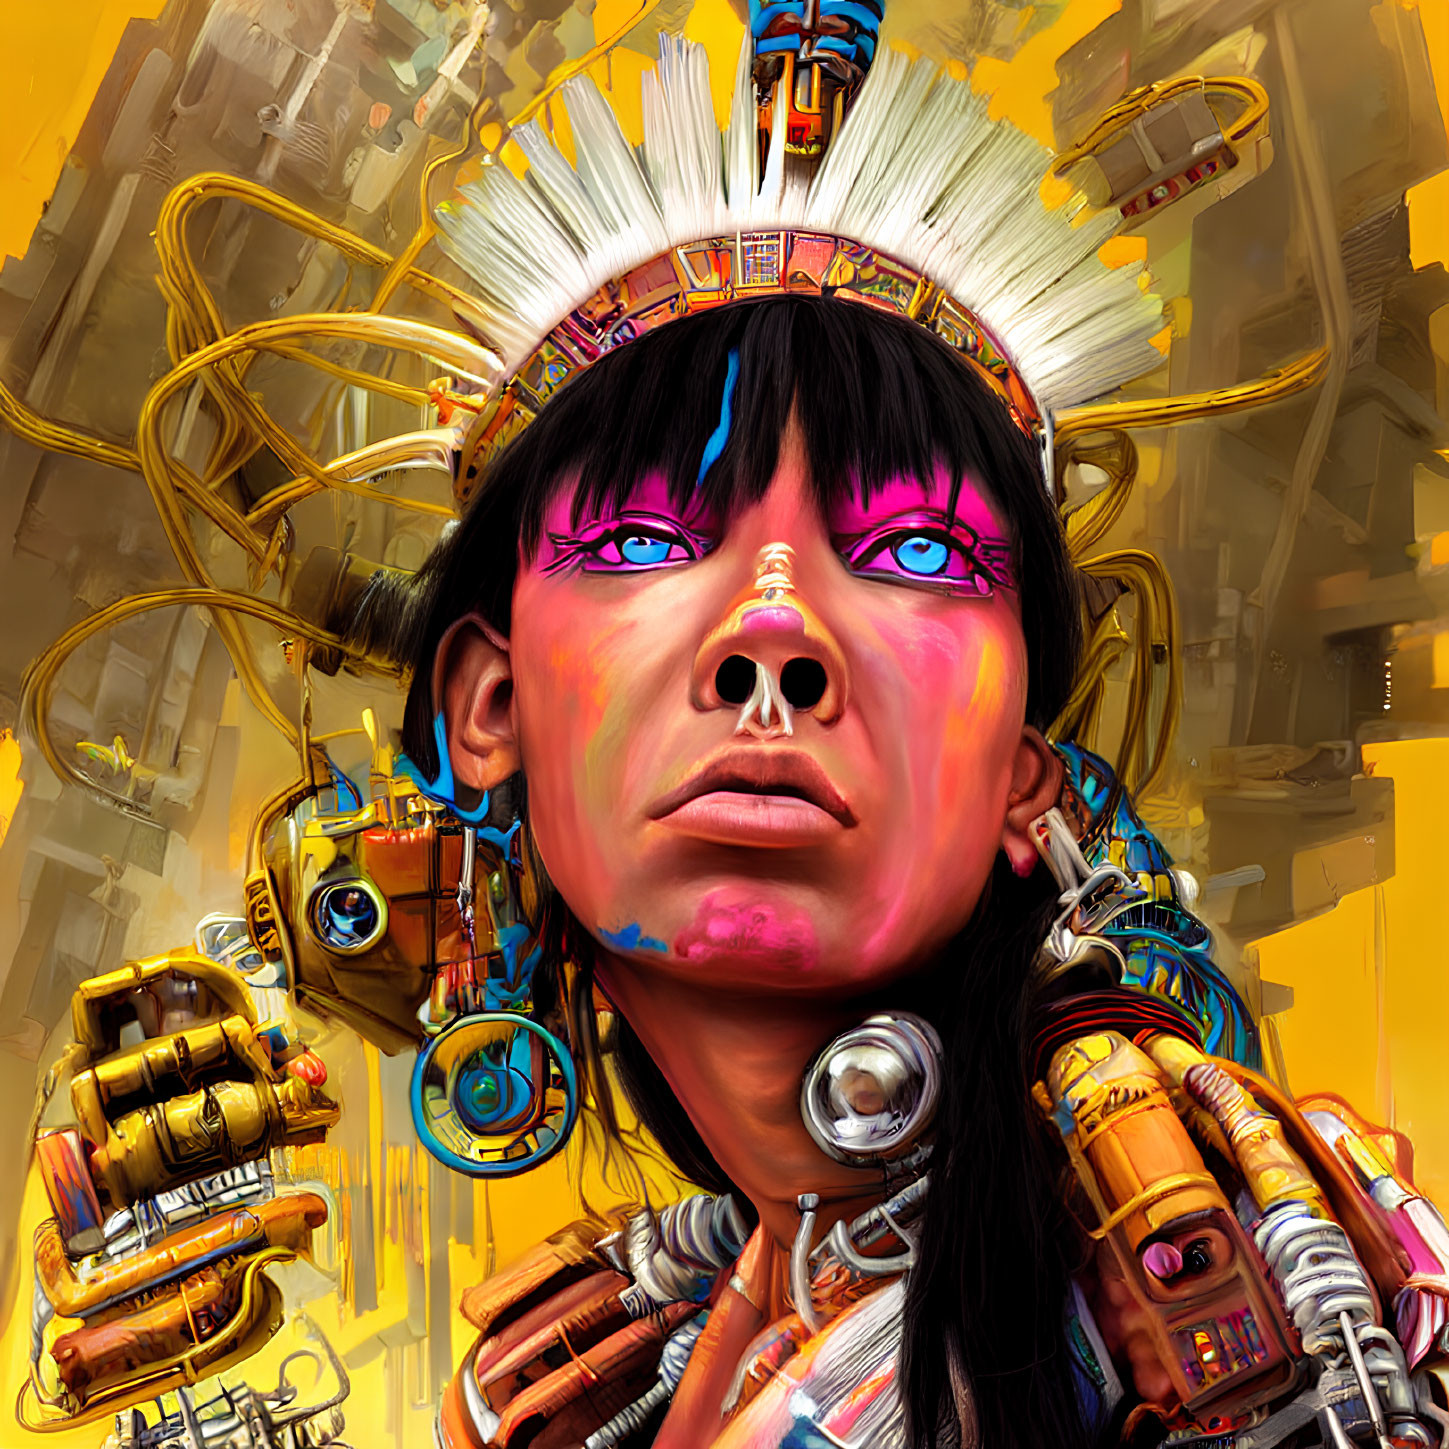 Futuristic individual with indigenous headdress and robotic arms on abstract background